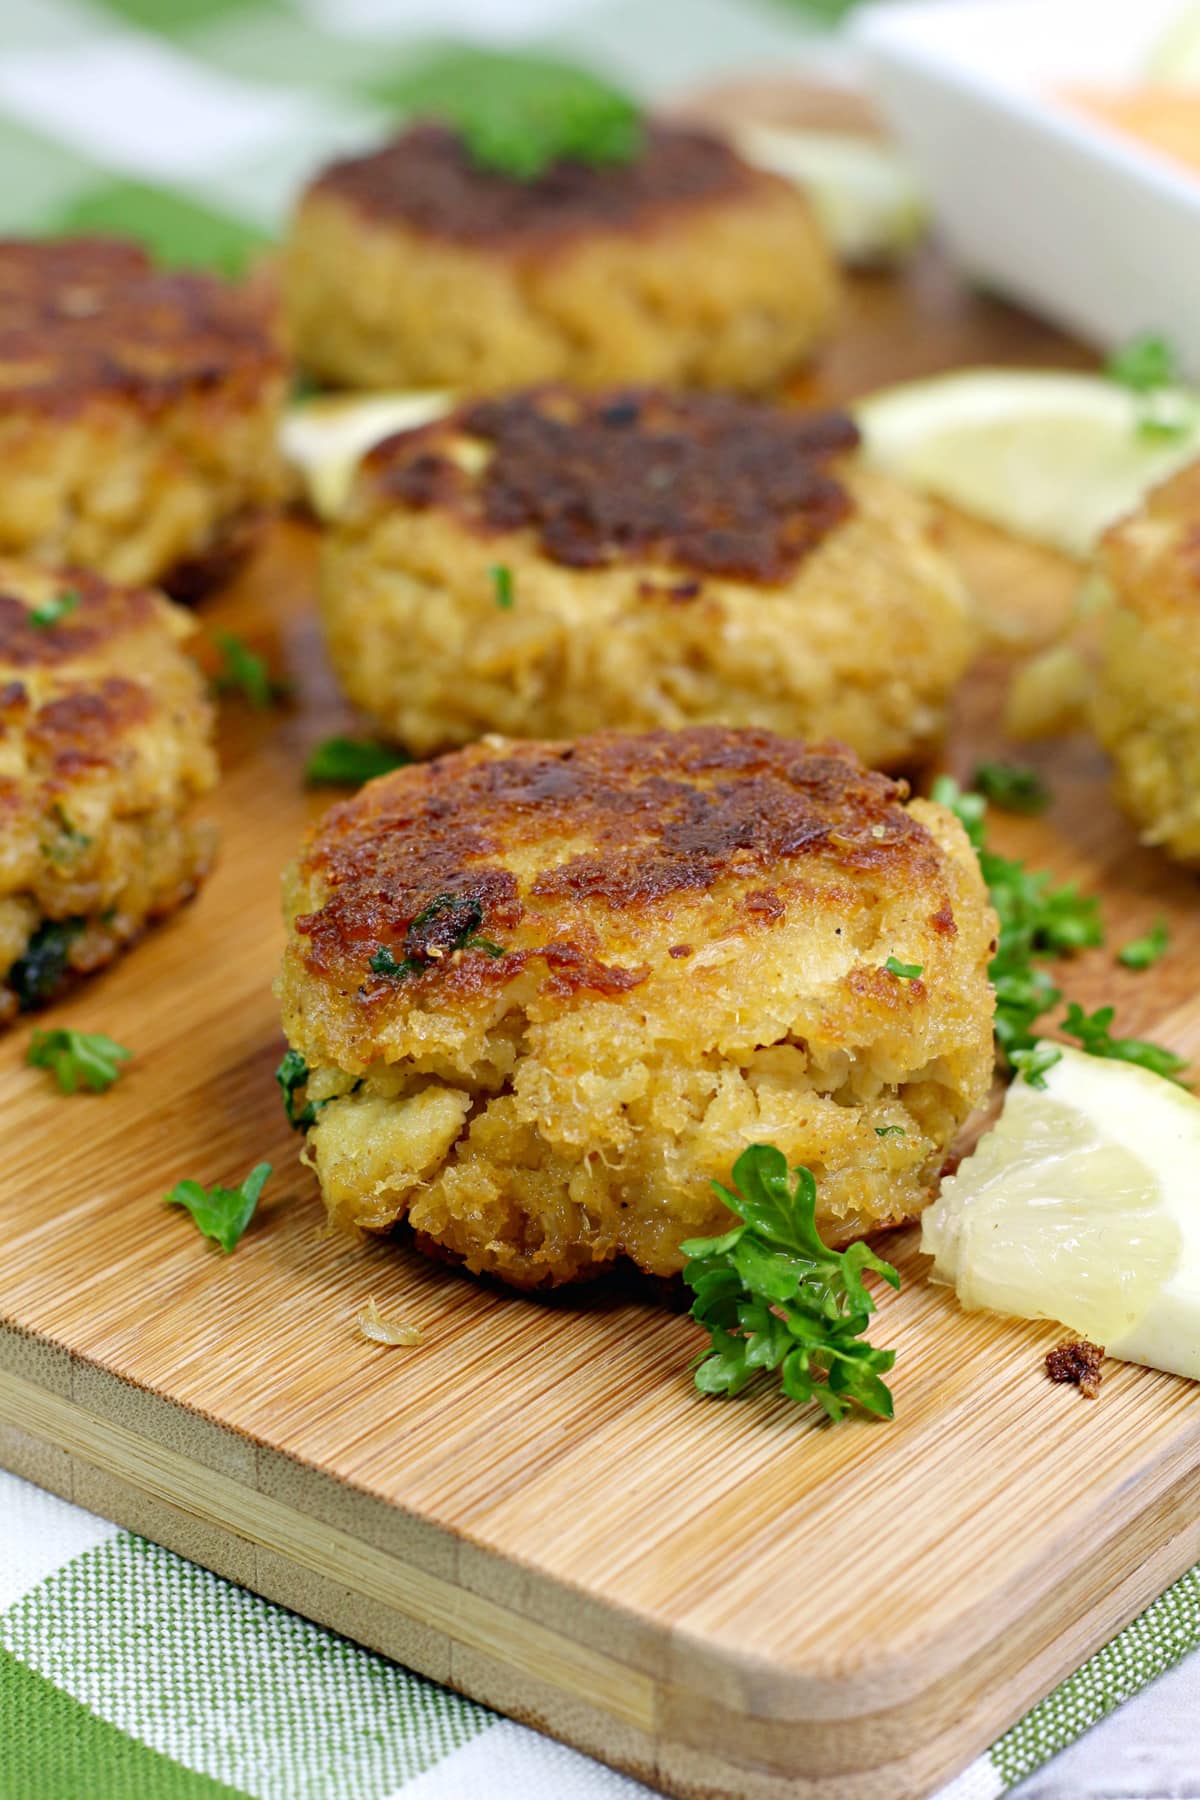 Homemade crab cakes on a wooden cutting board